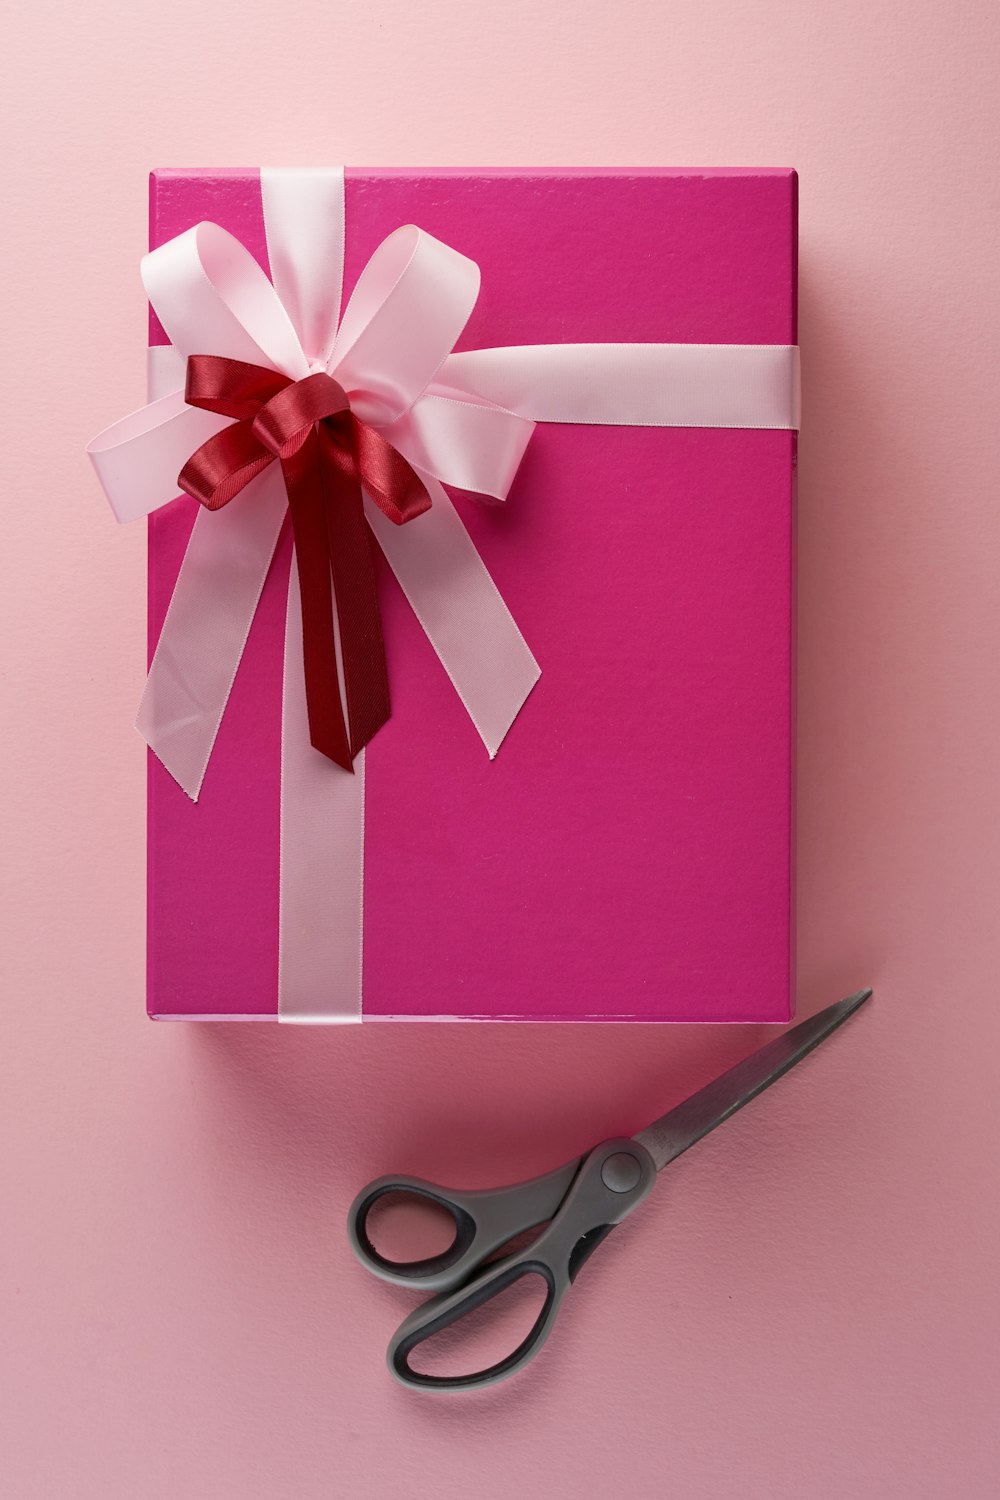 750+ Gift Box Pictures | Download Free Images & Stock Photos on Unsplash